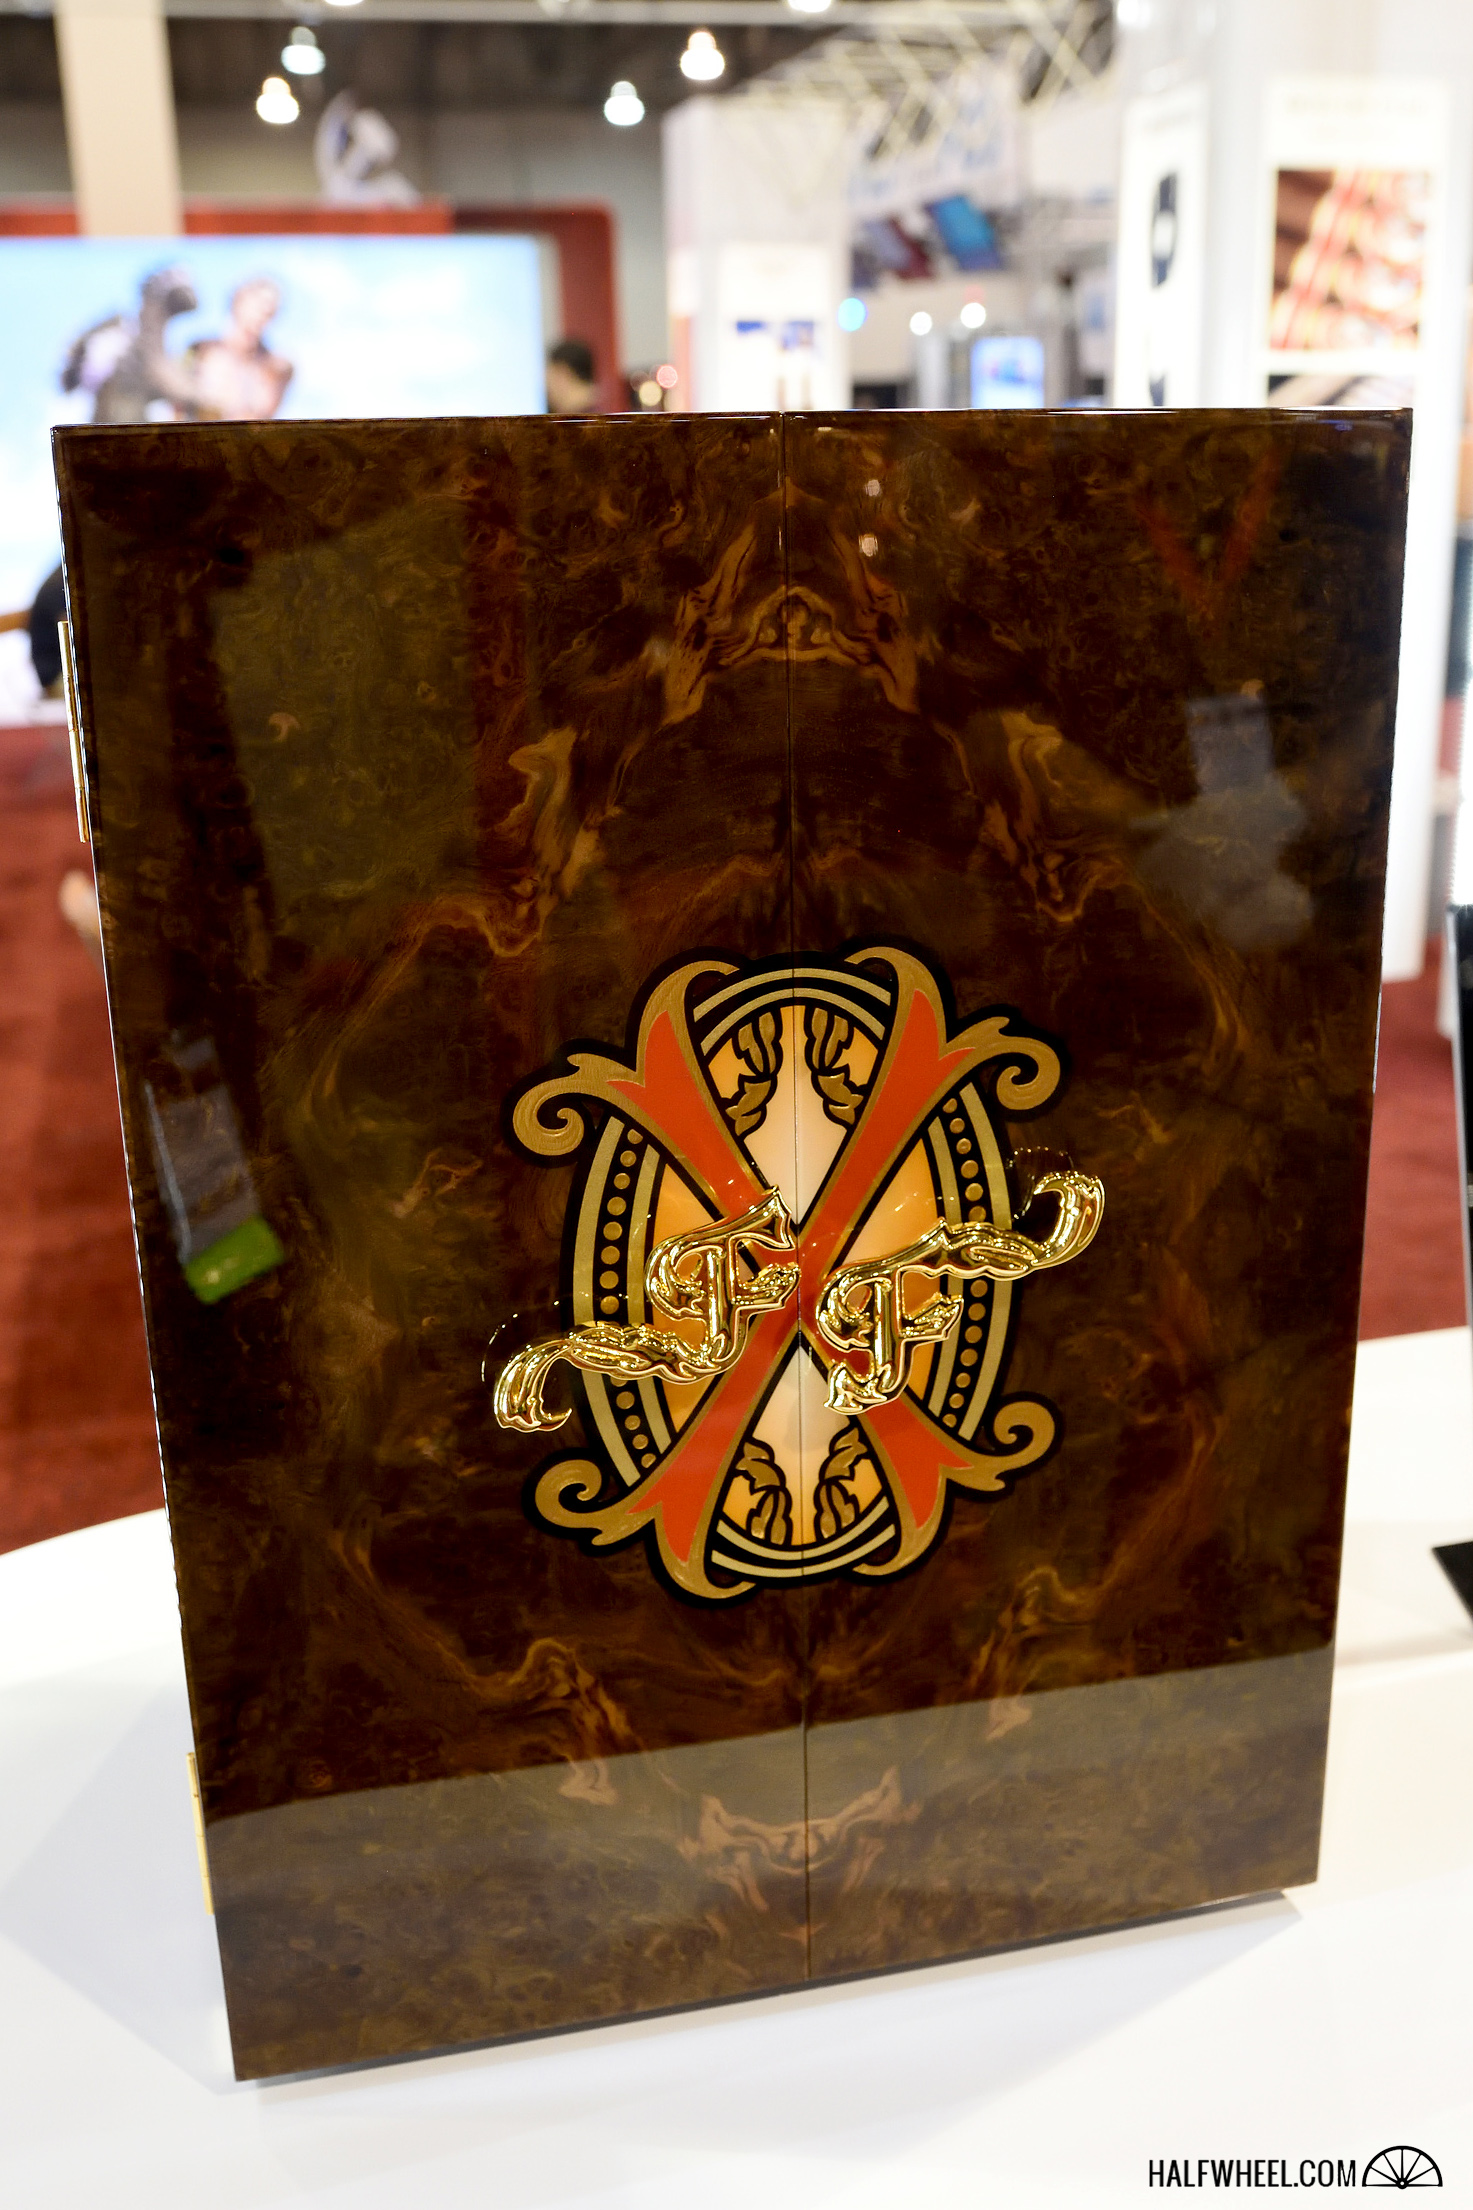 Prometheus 2016 Limited Edition Fuente Fuente Opus X Story Humidor 6 IPCPR 2016